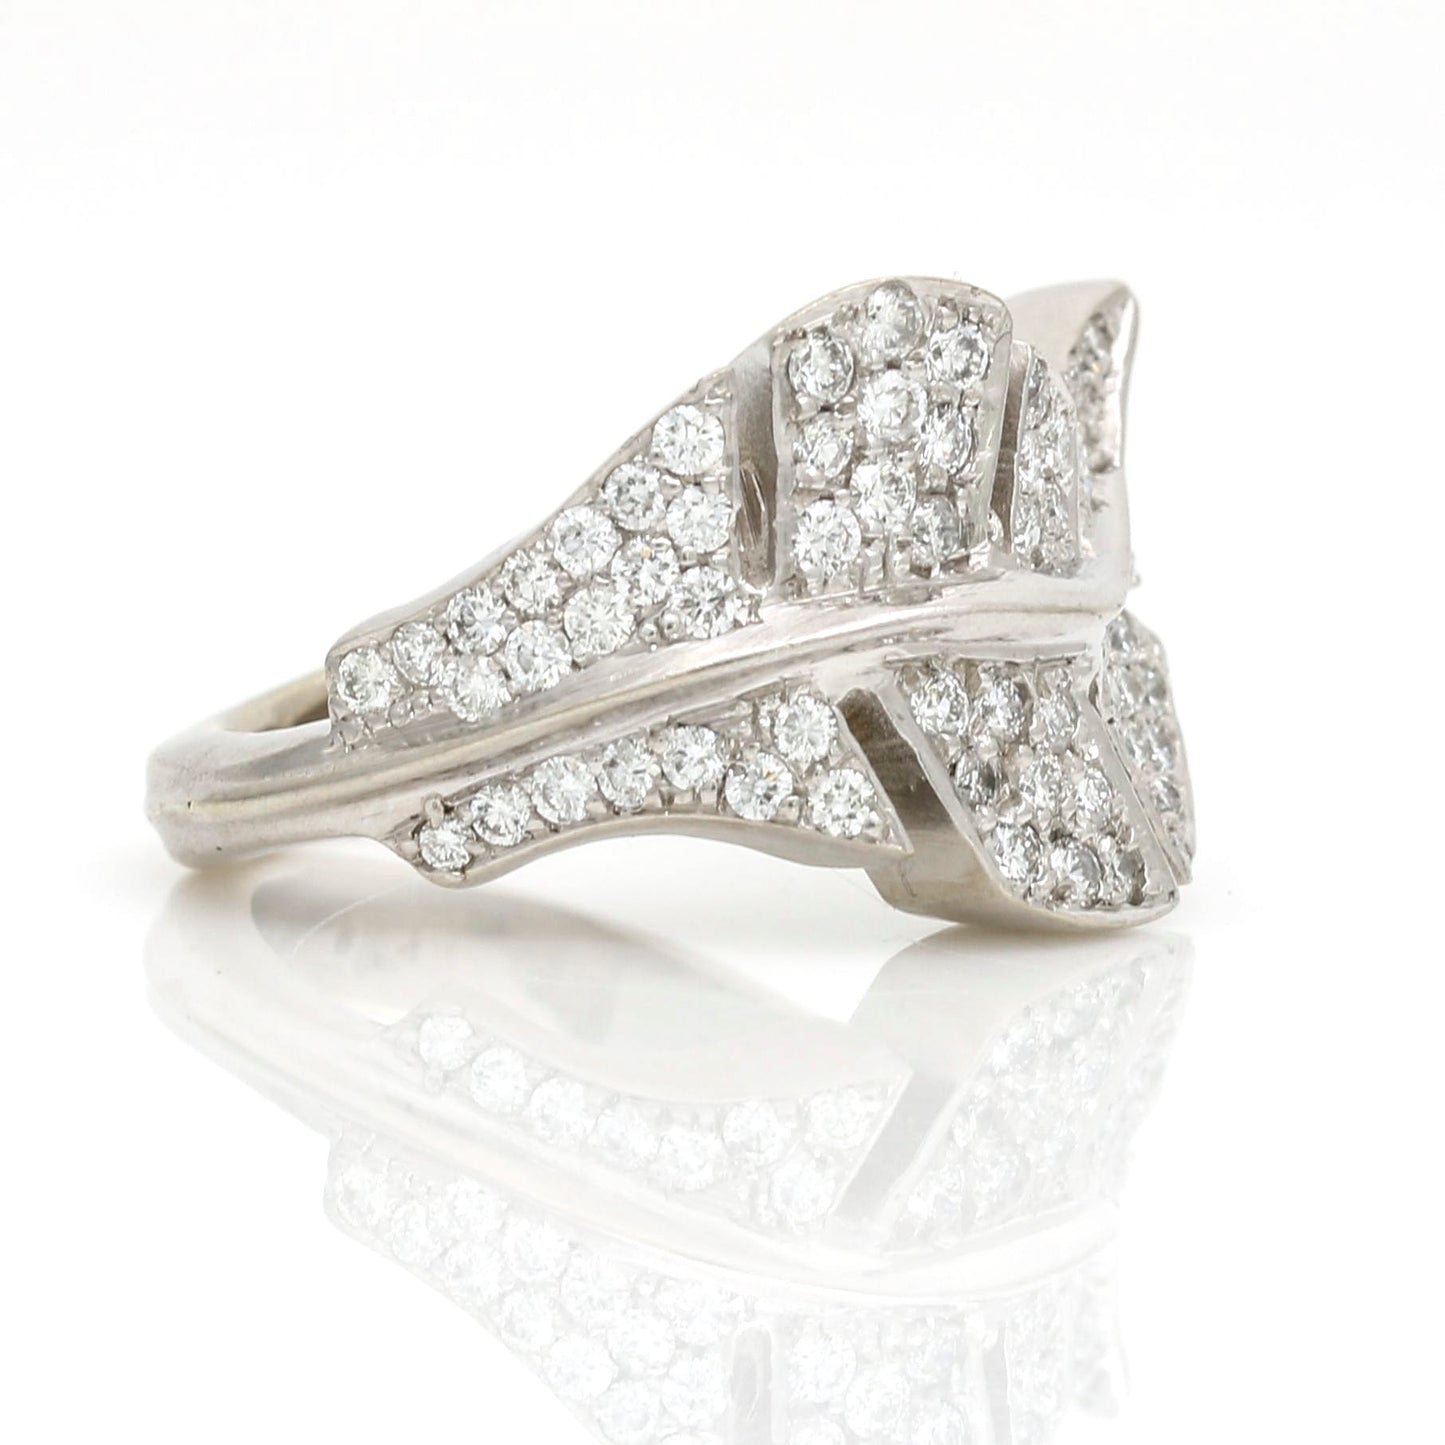 Women's Pave Diamond Leaf Statement Ring in 18k White Gold